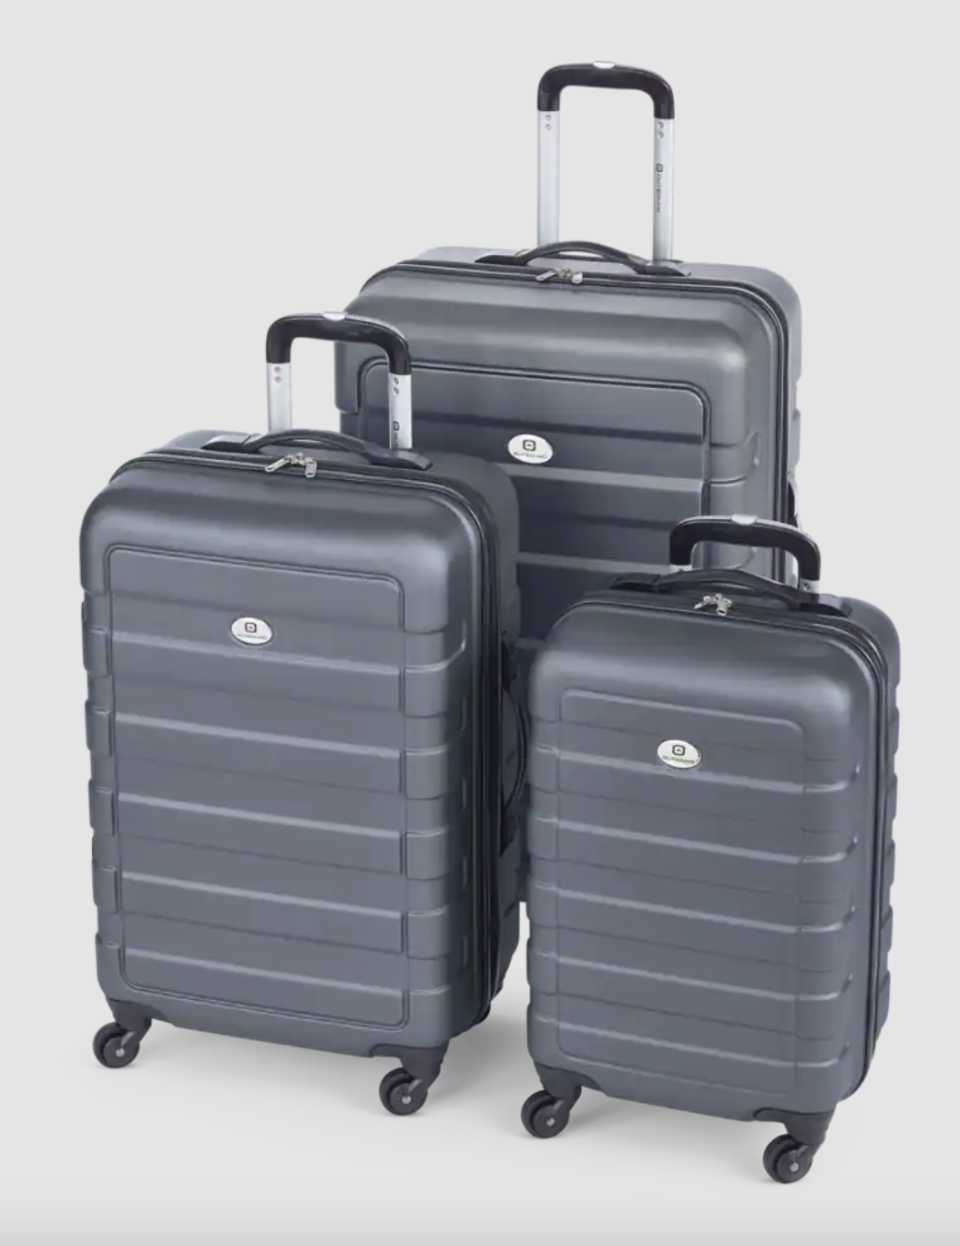 Outbound 3-Piece Hardside Spinner Wheel Travel Luggage Suitcase Set (photo via Canadian Tire)